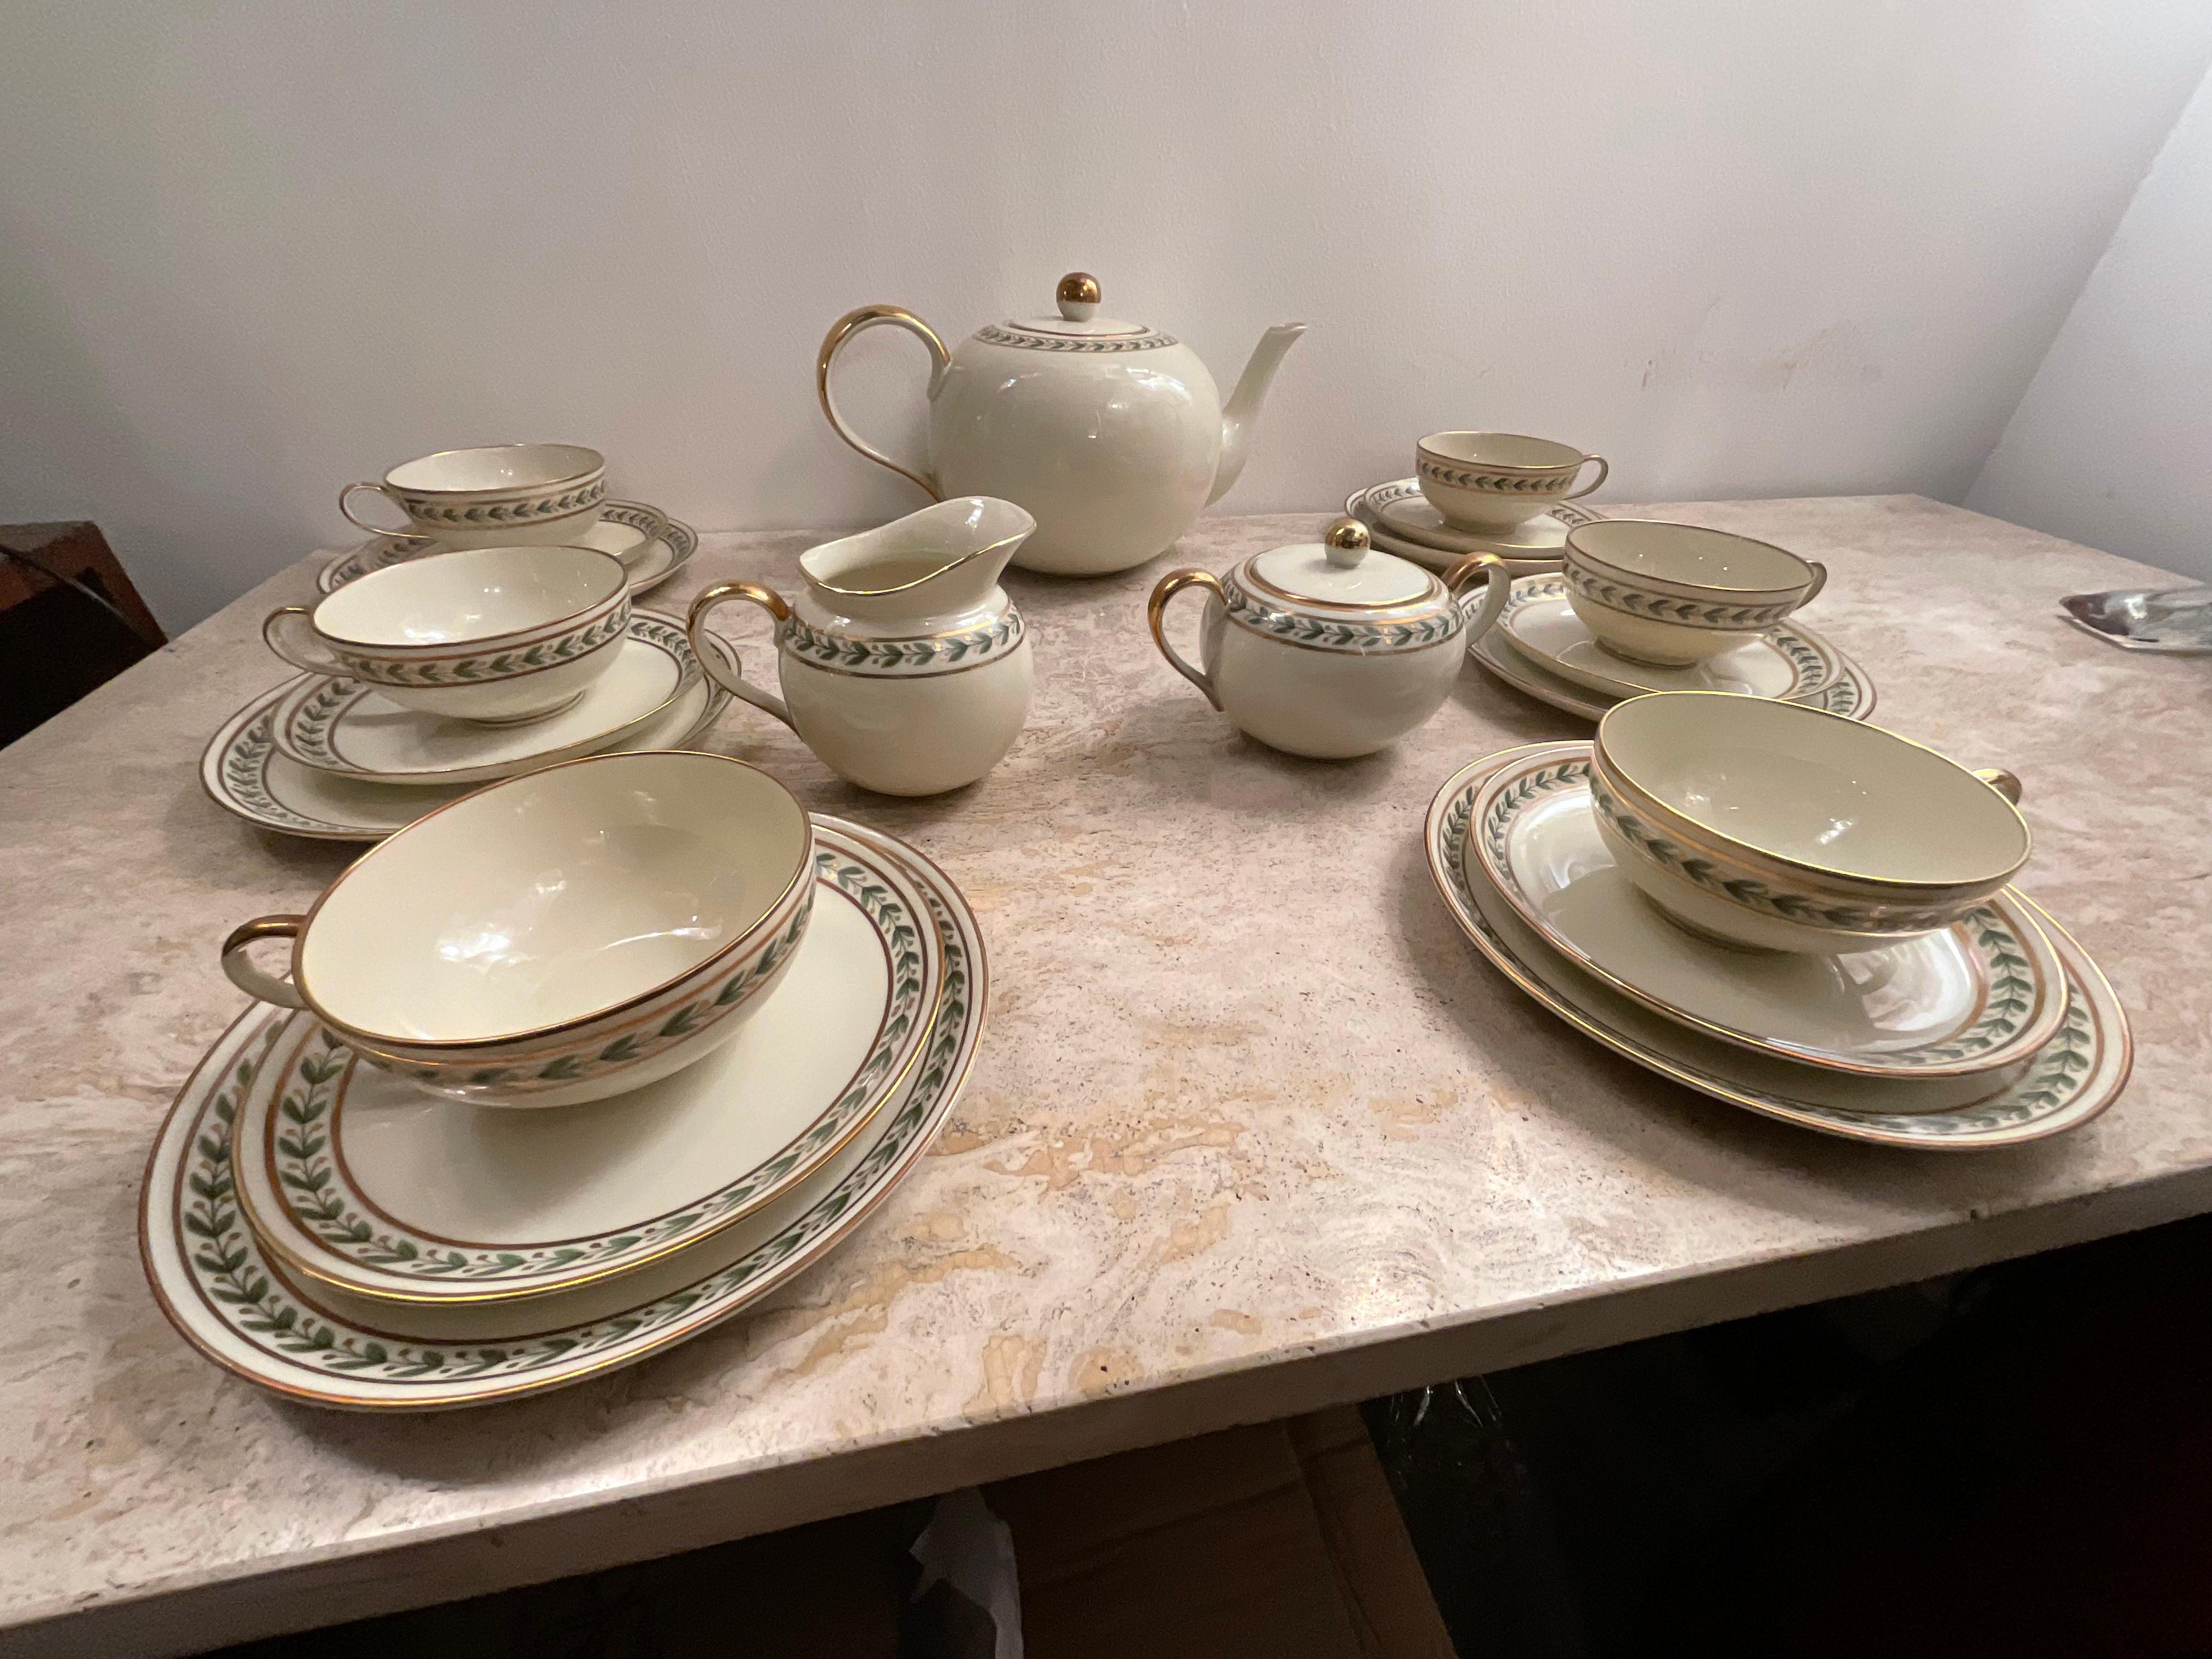 Gio Ponti, Tea for 6 with Dessert Plates, in Porcelain Richard Ginori, Year 1939 For Sale 2